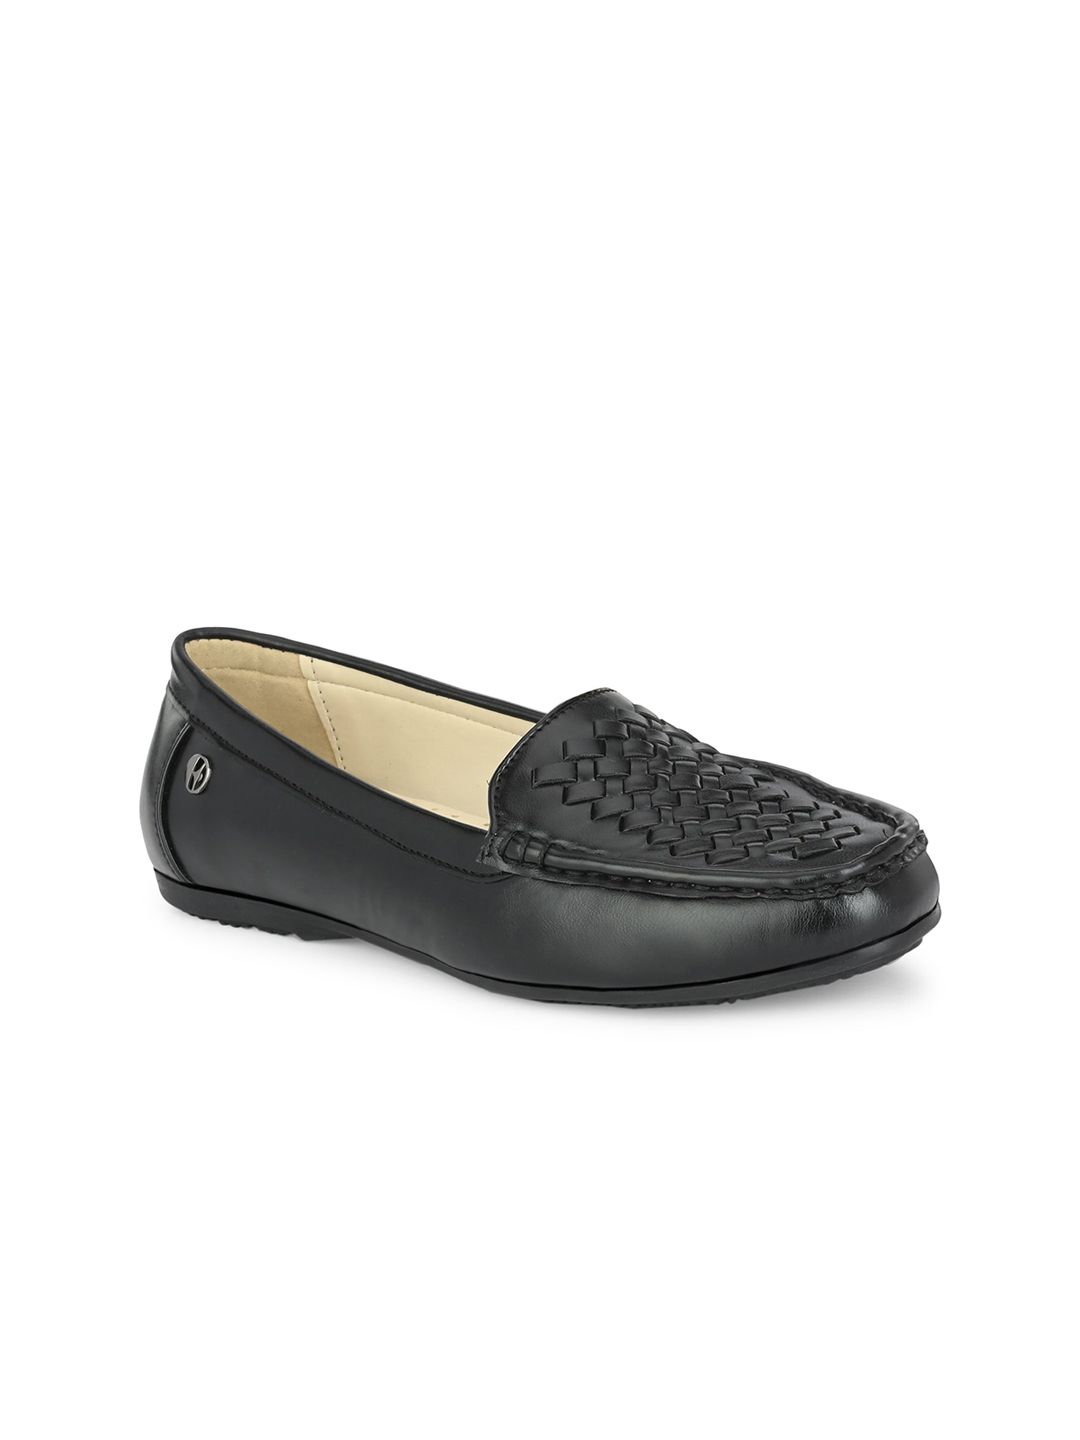 ELLE Women Woven Design Loafers Price in India